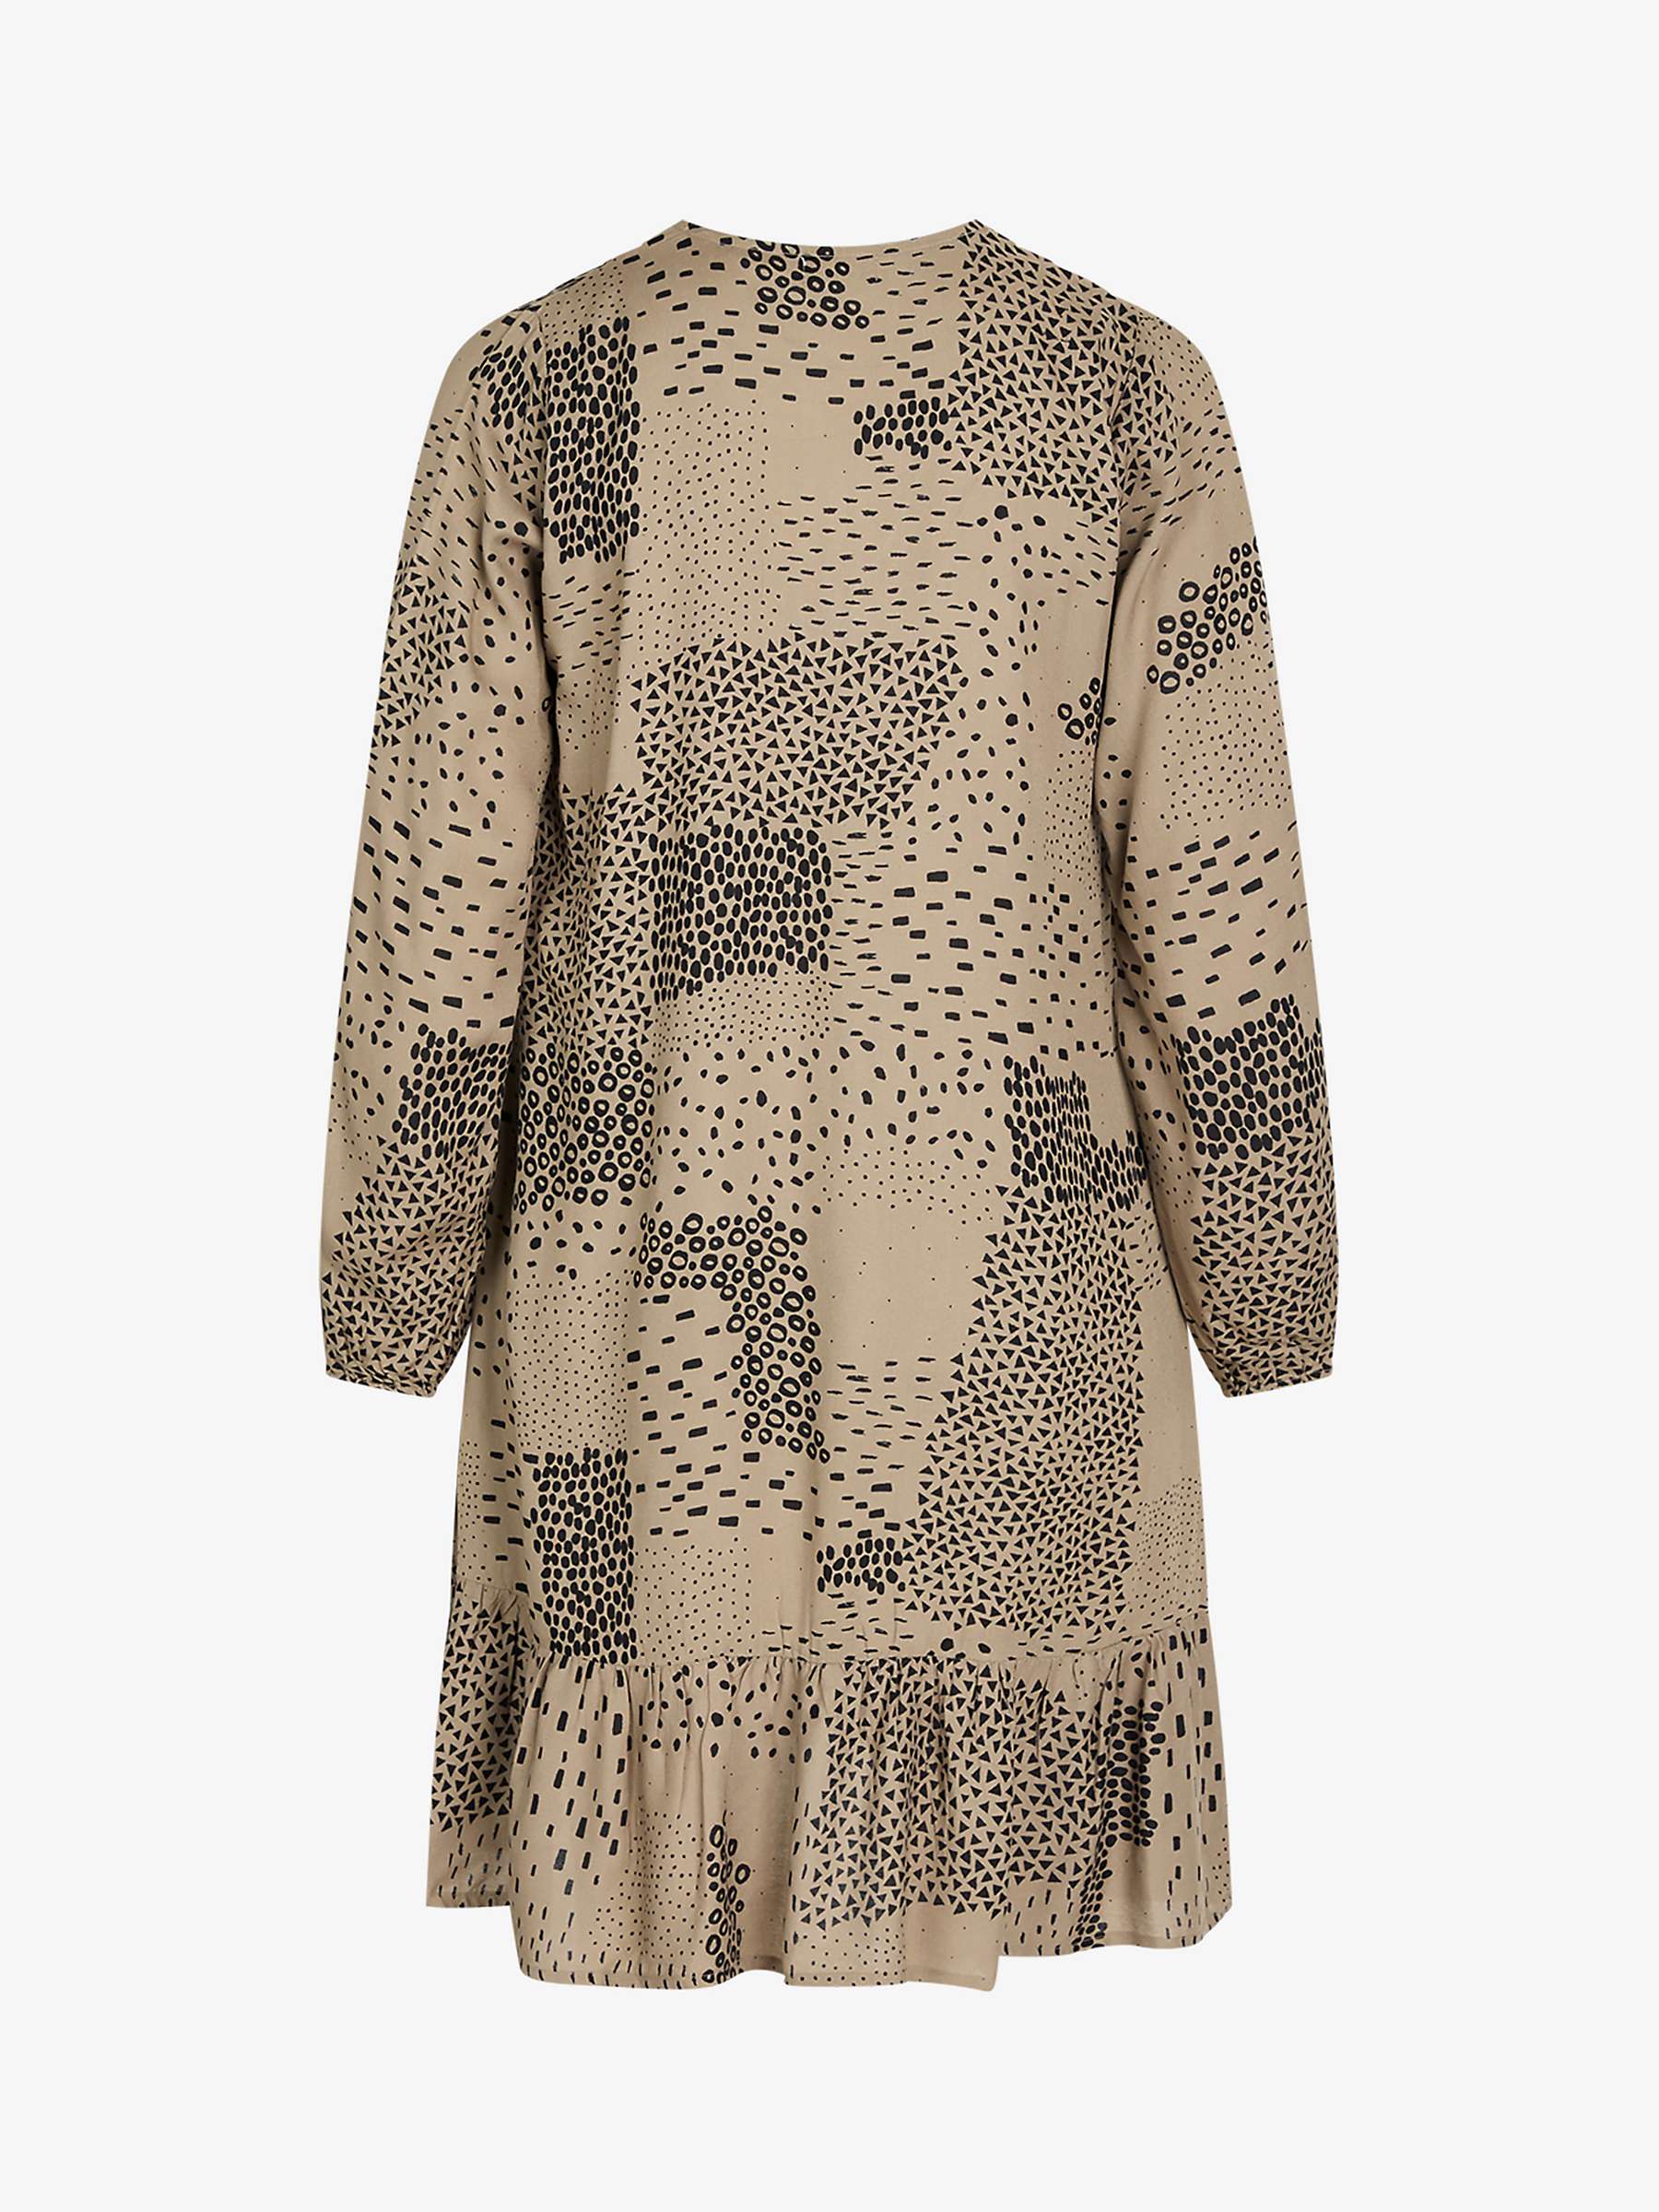 Buy Unmade Copenhagen Loulou Abstract Mini Dress Online at johnlewis.com